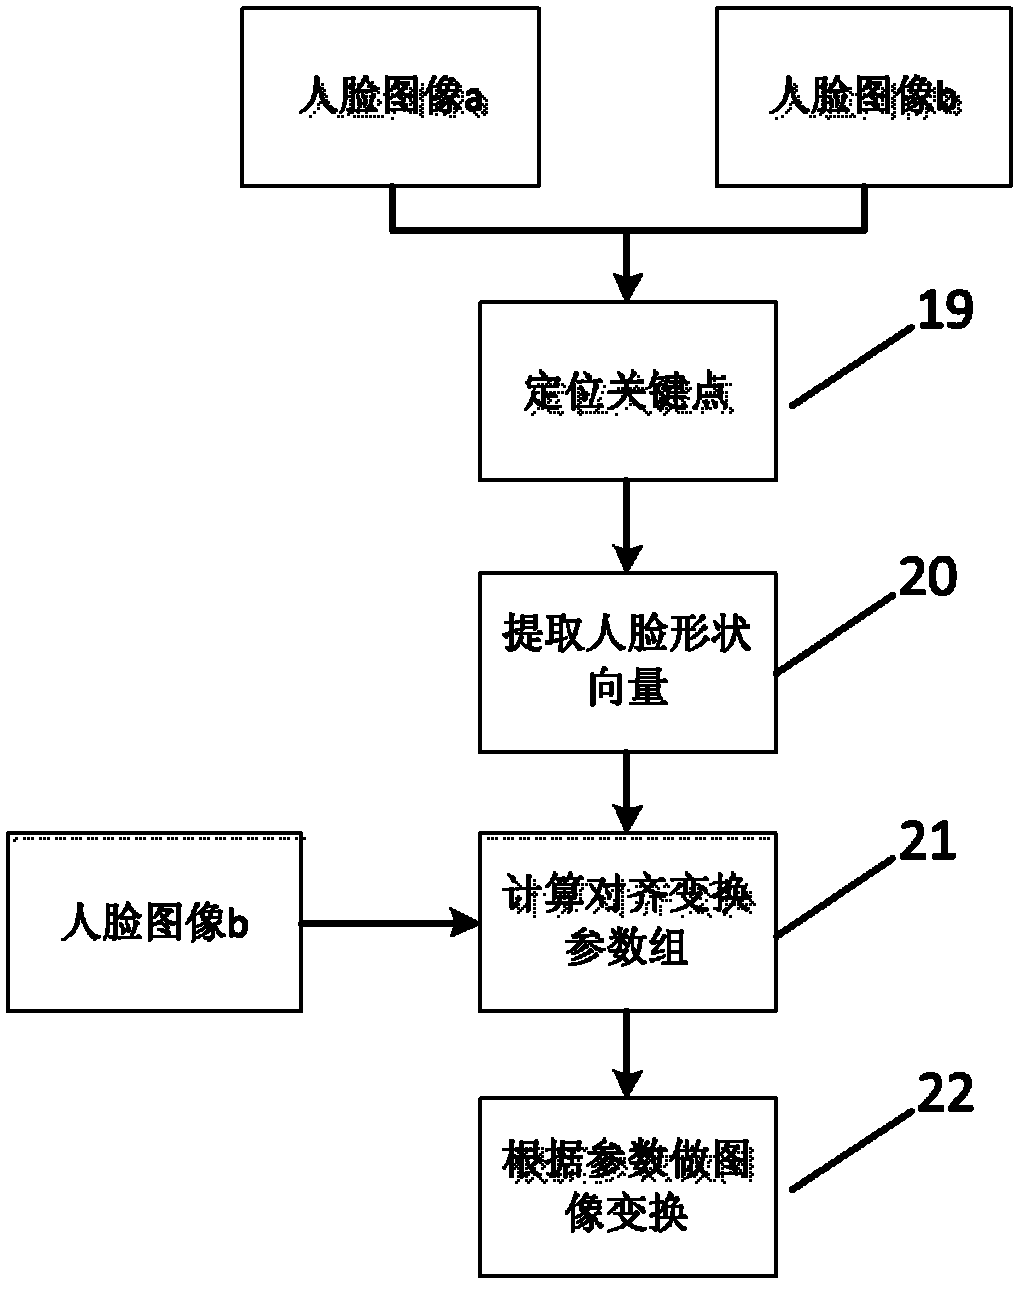 Multi-gesture and cross-age oriented face image authentication method